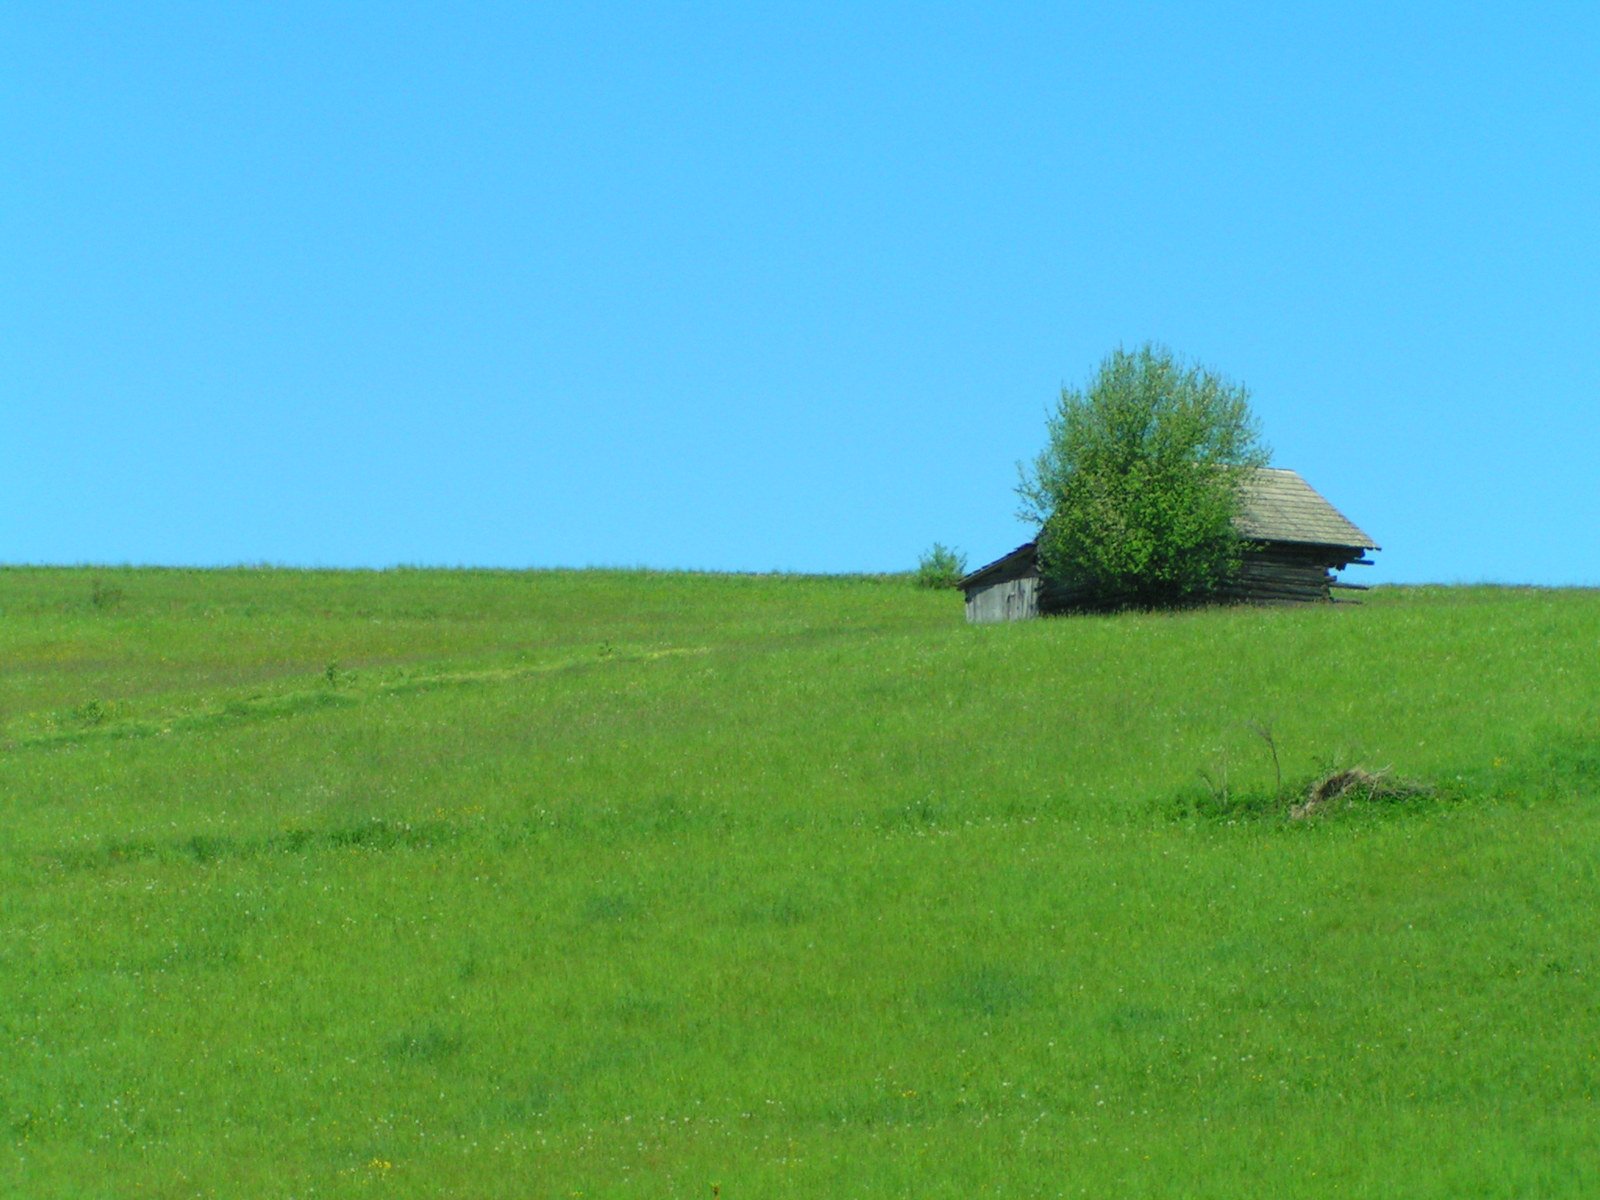 green grassy hill with a barn and shed on top